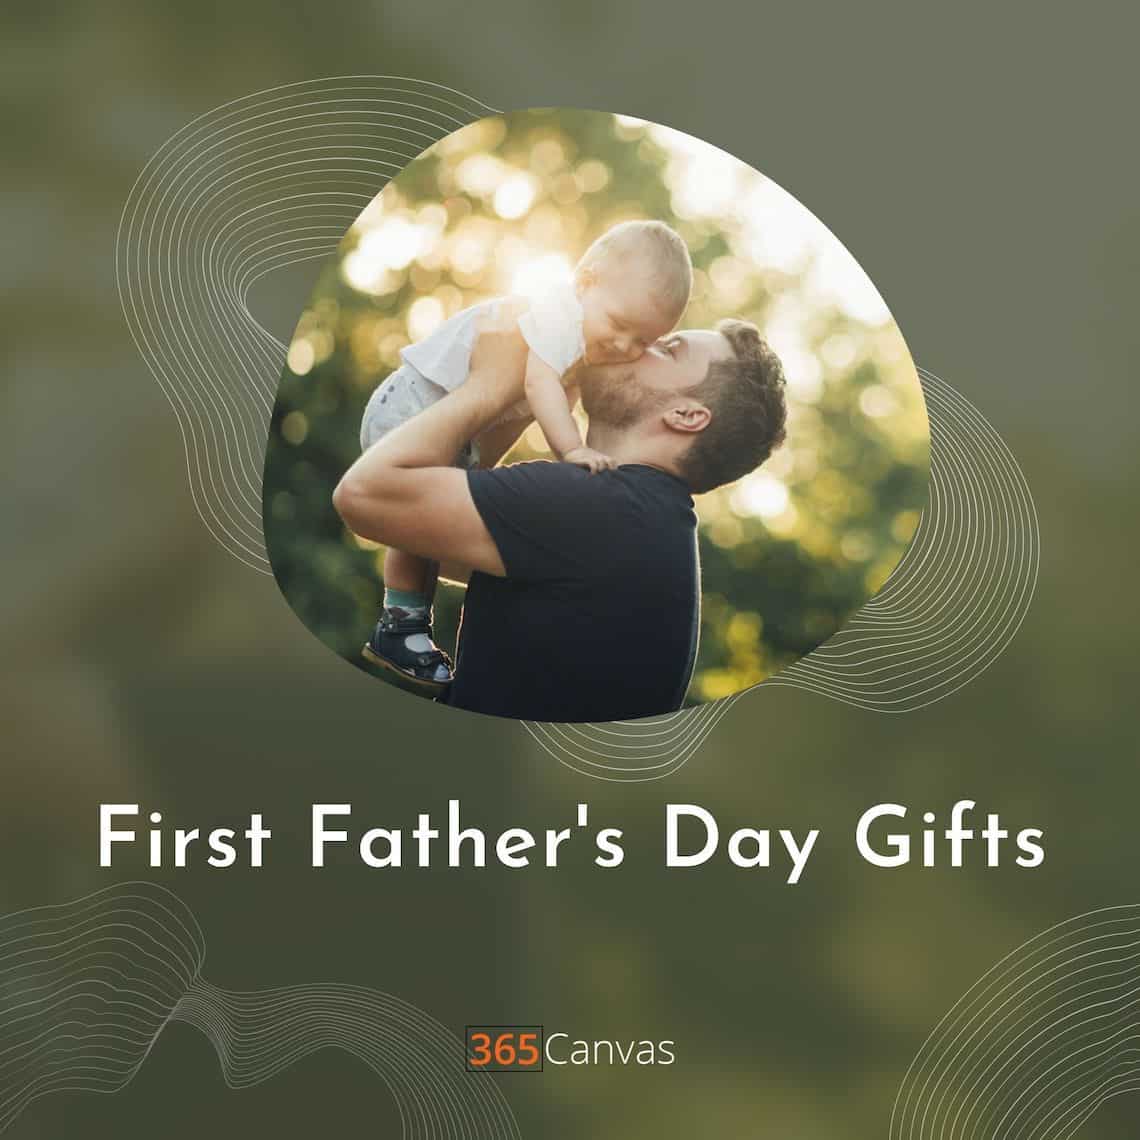 28 Heartfelt First Father’s Day Gift Ideas To Celebrate New Dads (2022)